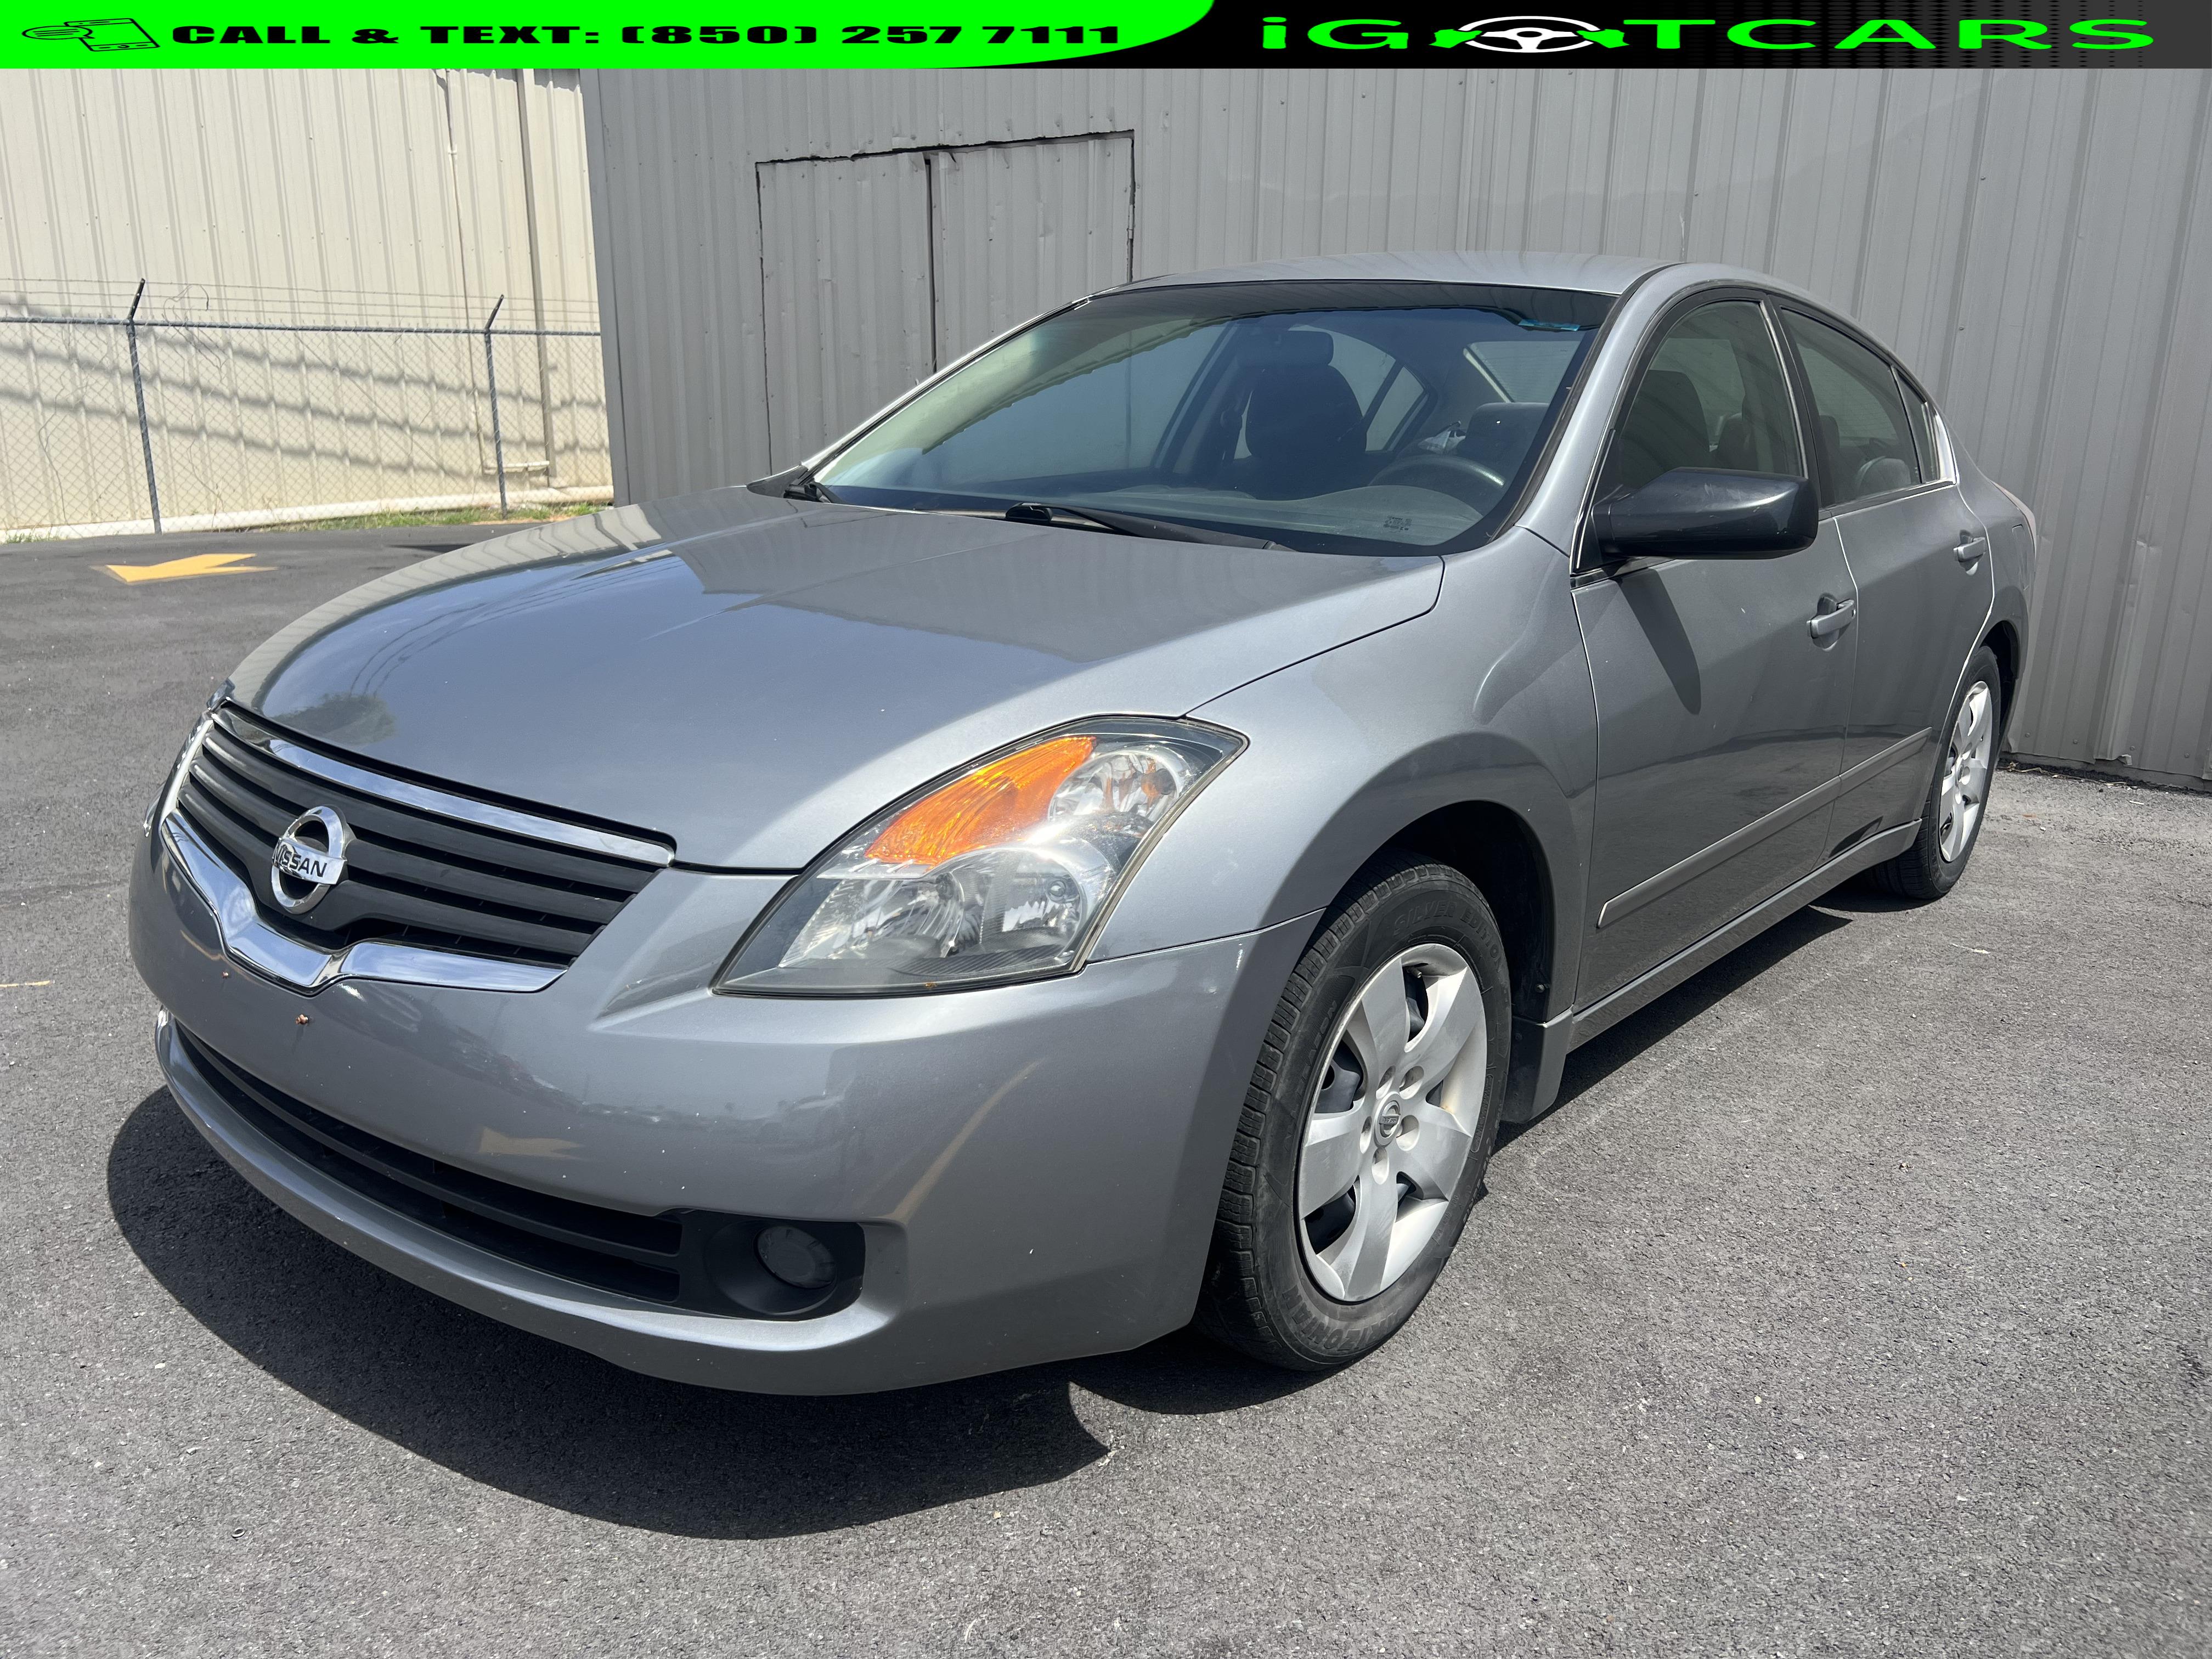 Used 2008 Nissan Altima for sale in Houston TX.  We Finance! 